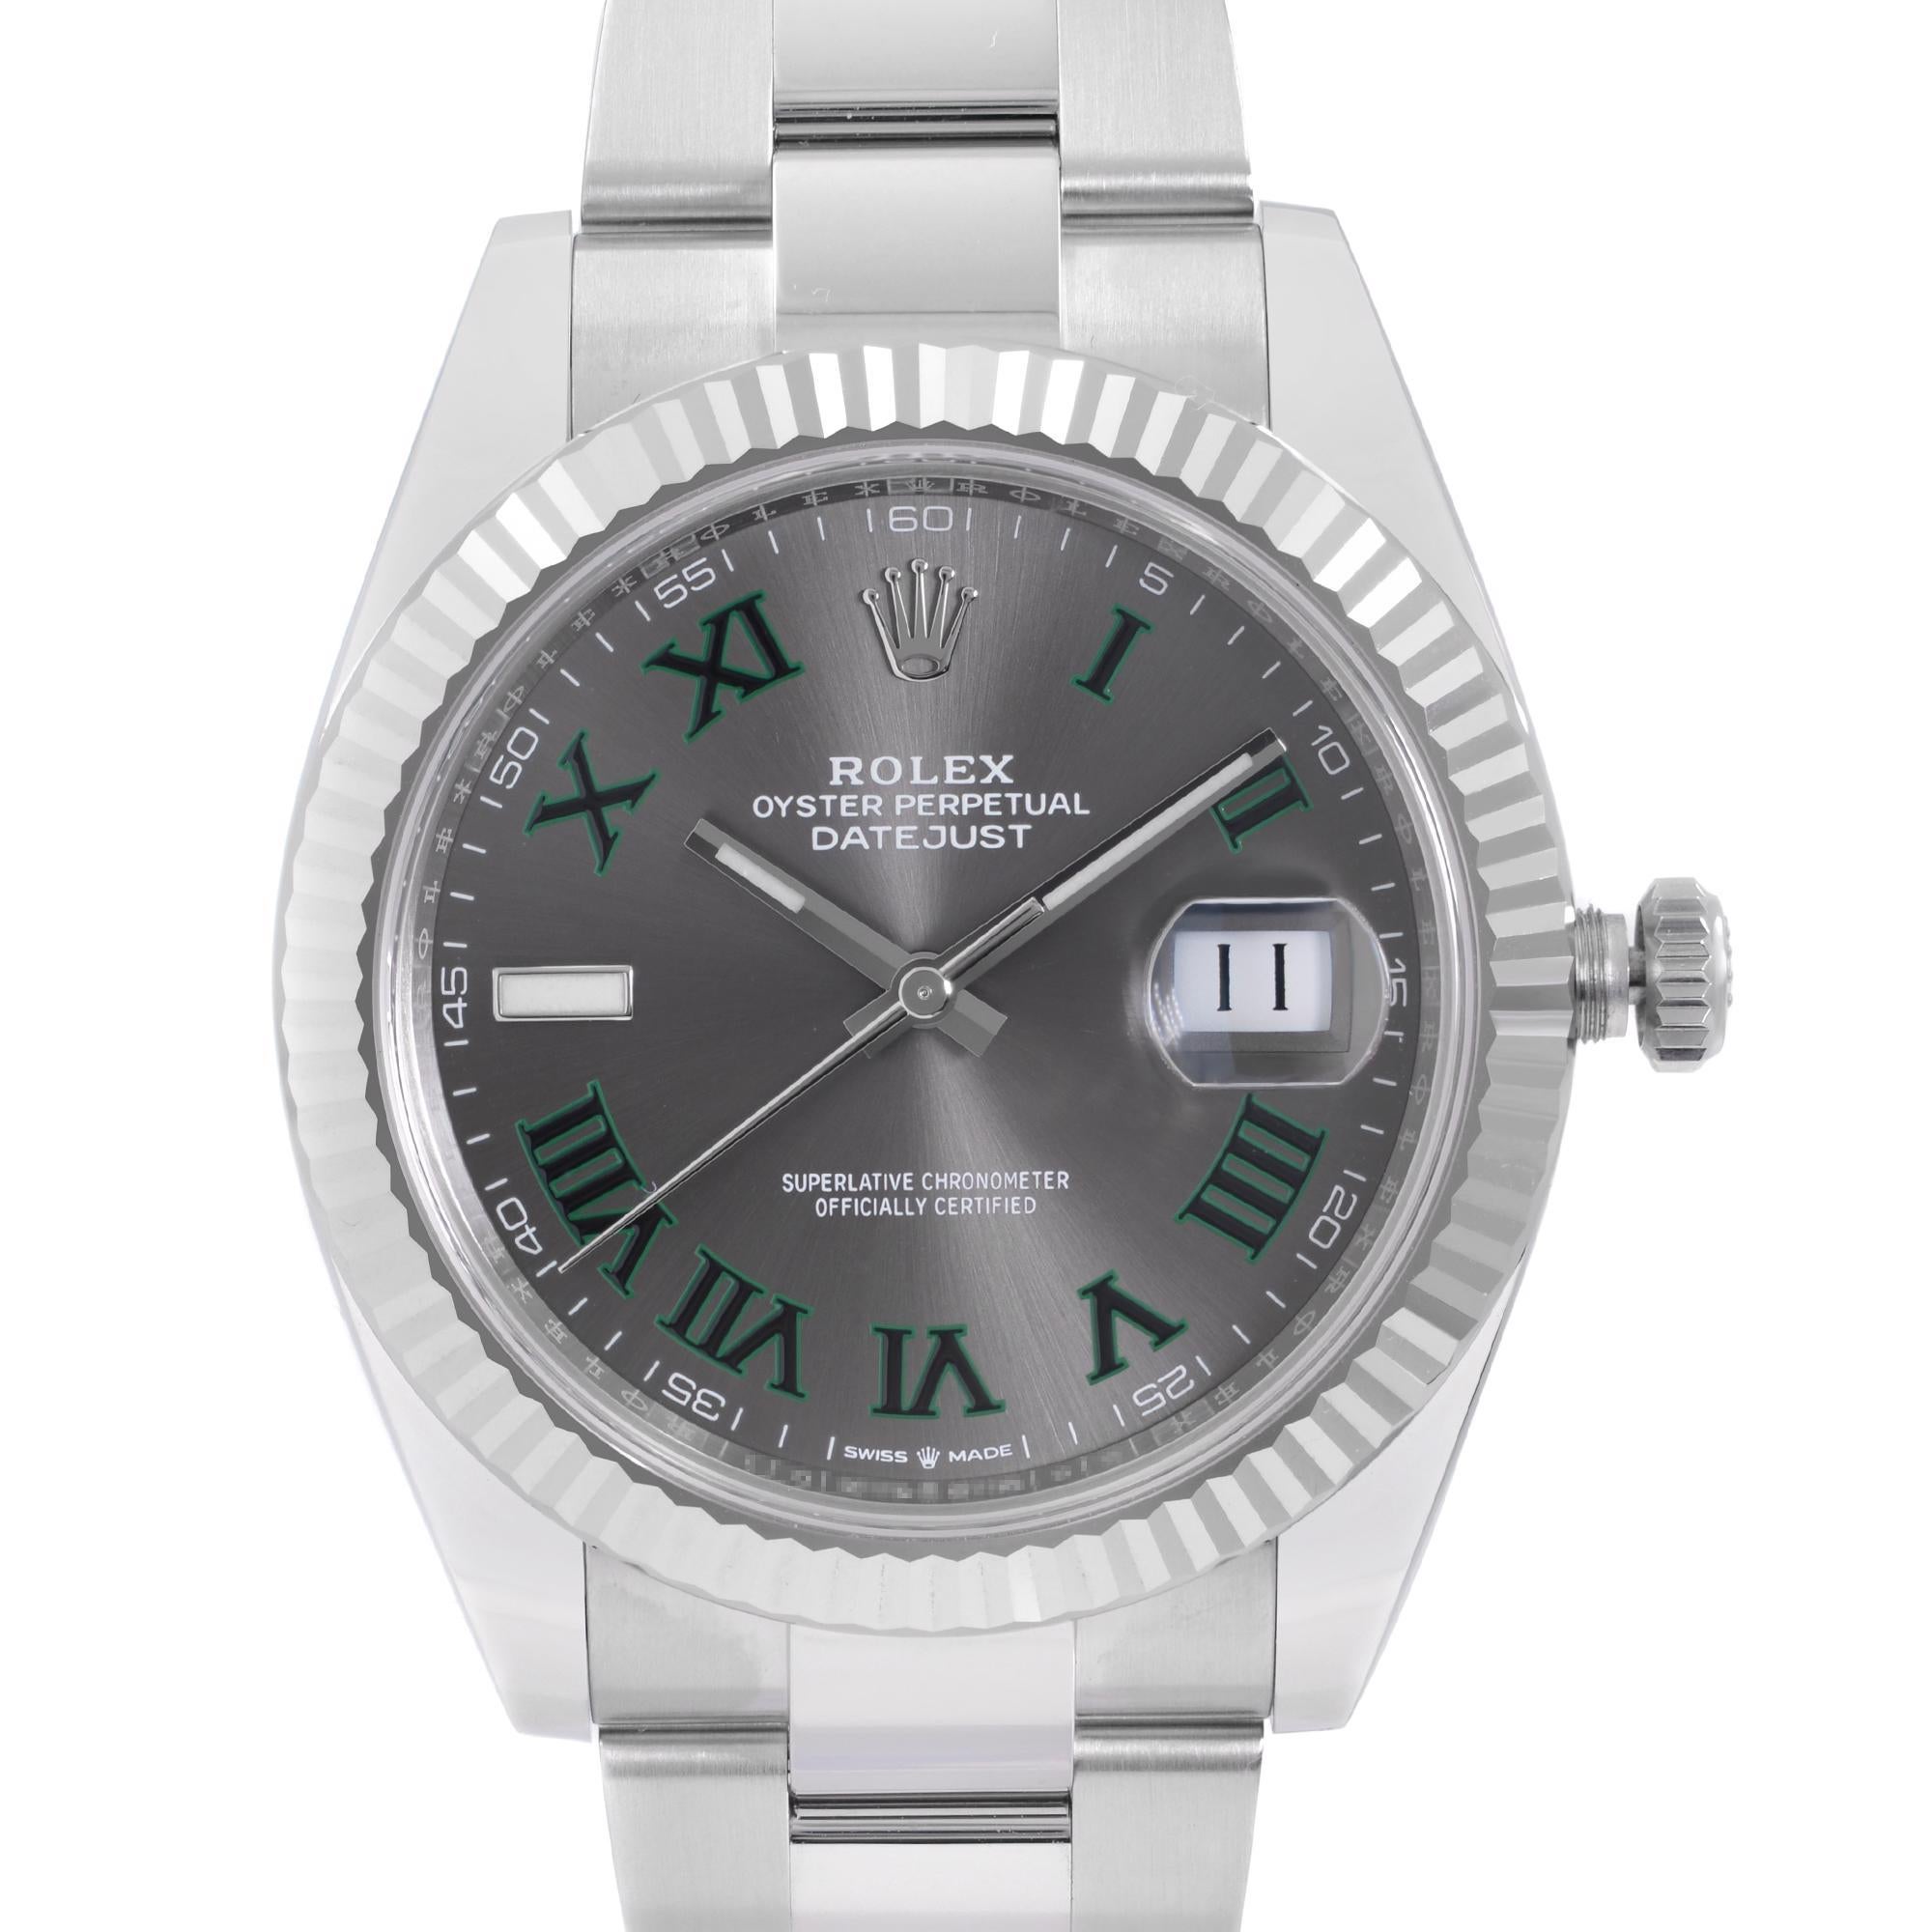 Unworn. Comes with the original box and papers.

 Brand: Rolex  Type: Wristwatch  Department: Men  Model Number: 126334  Country/Region of Manufacture: Switzerland  Style: Dress/Formal,Luxury  Model: Rolex Datejust 126334  Vintage: No  Movement: